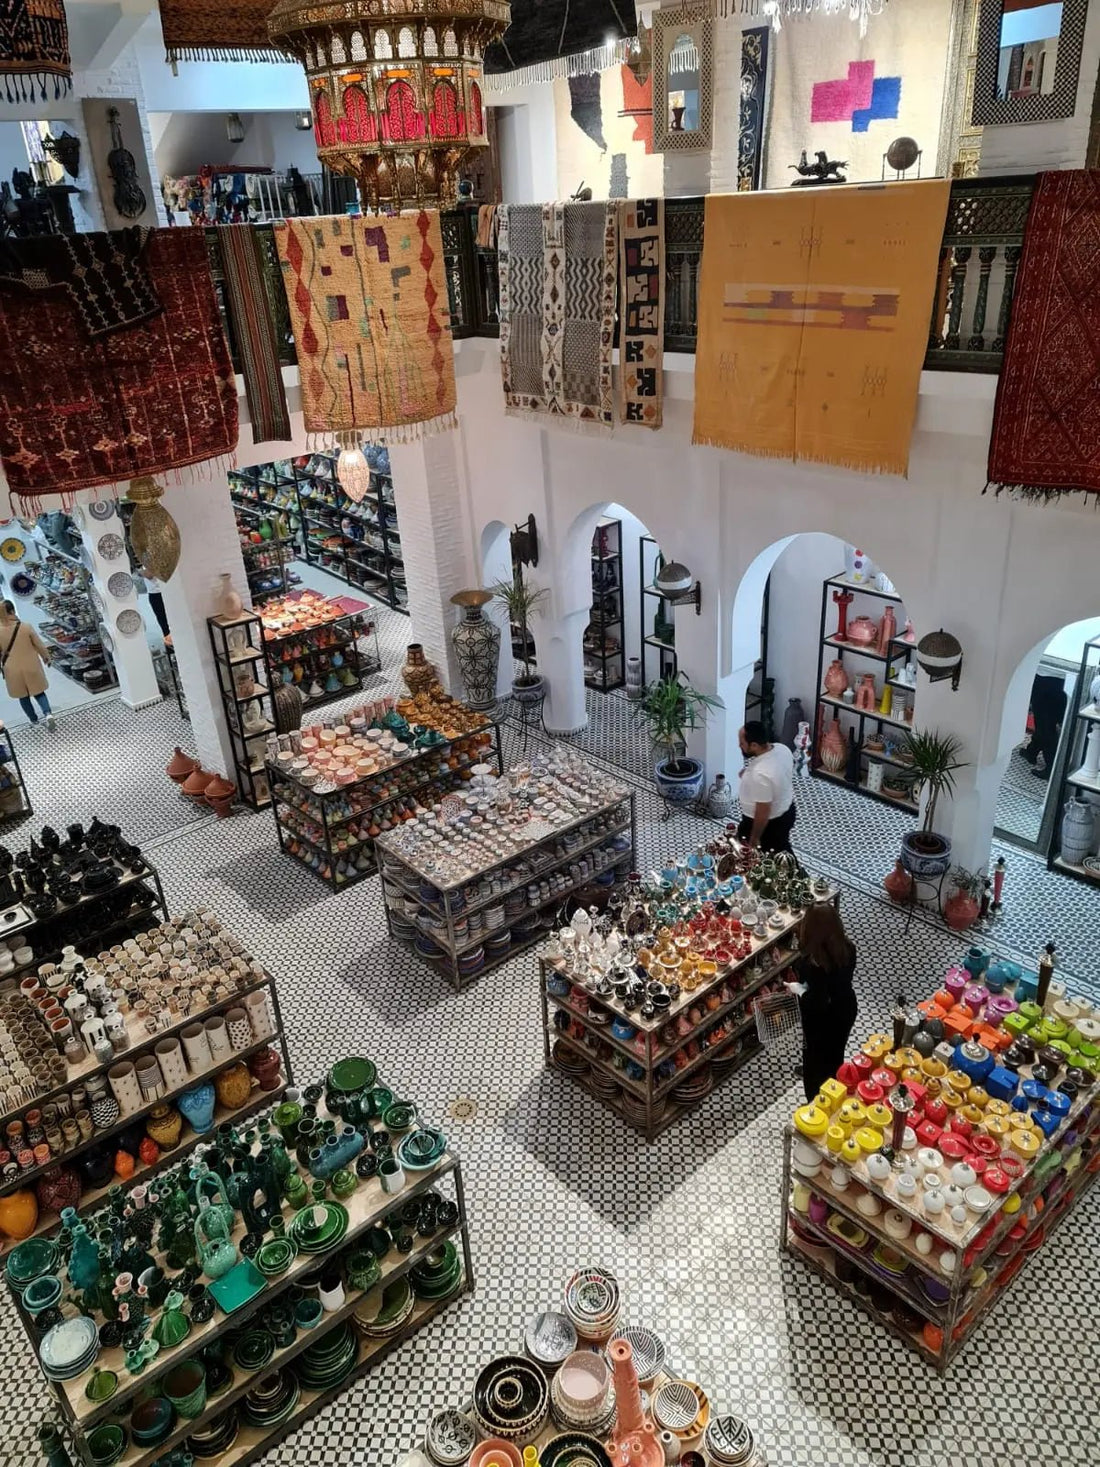 Dar Bouchaib Marrakech: A Retail Haven in the Heart of Morocco - Dar Bouchaib Marrakech